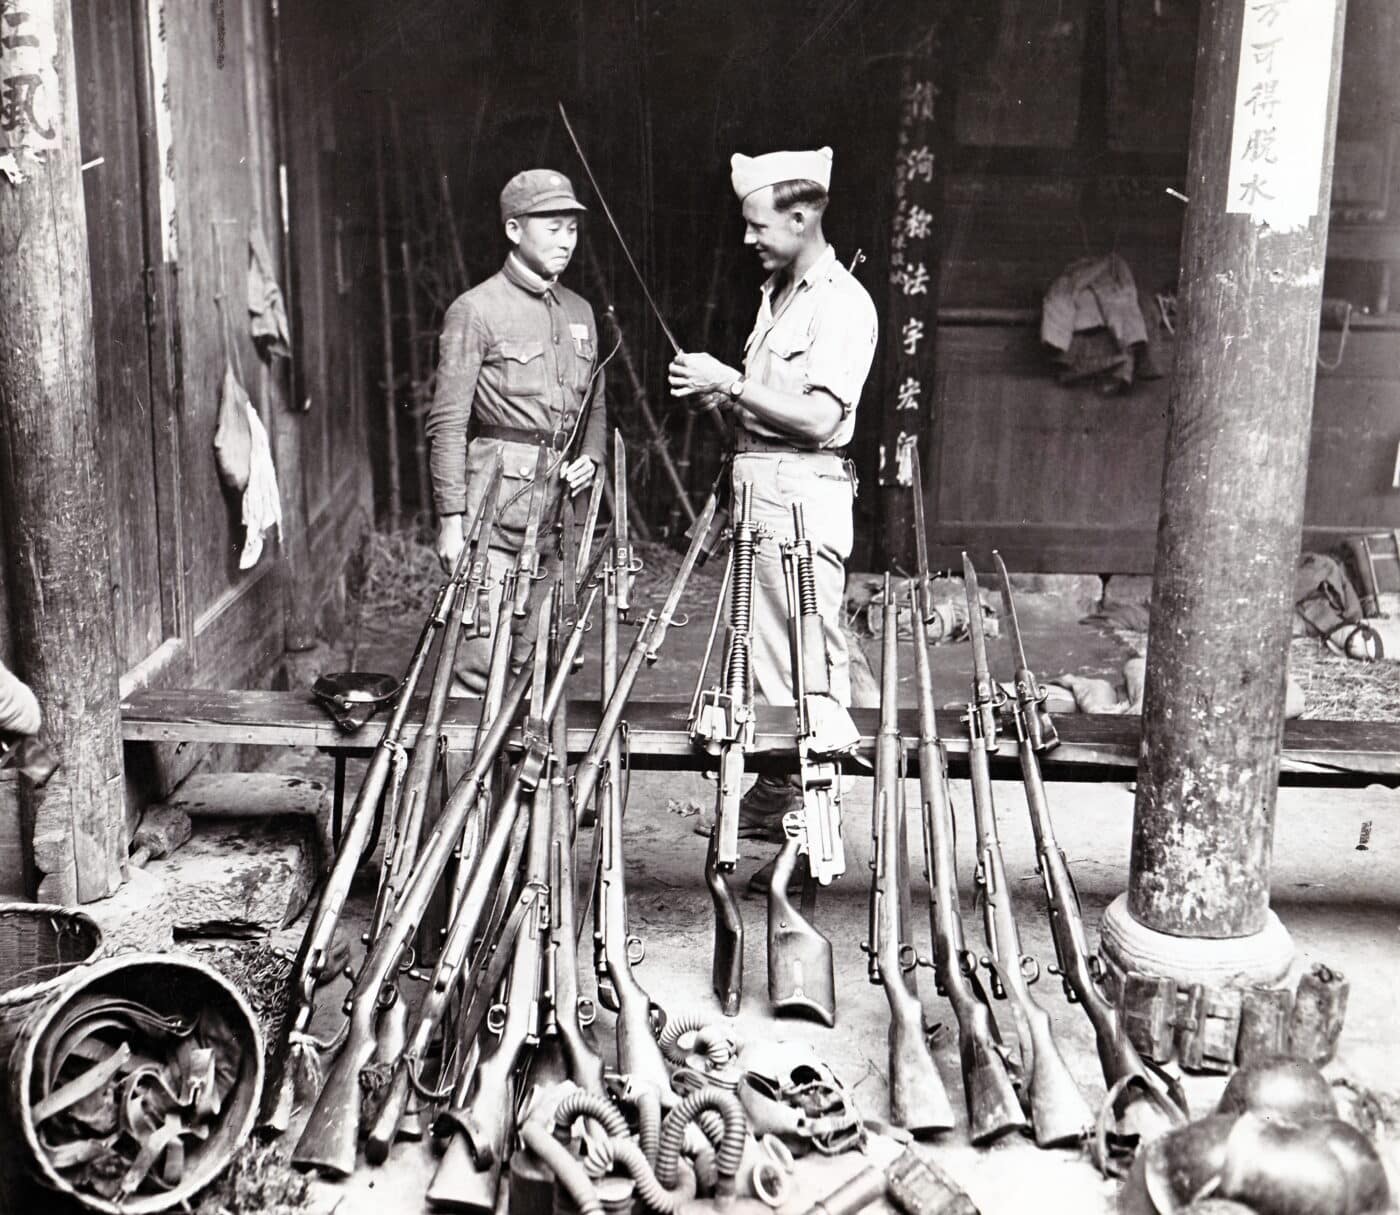 Japanese weapons captured in China